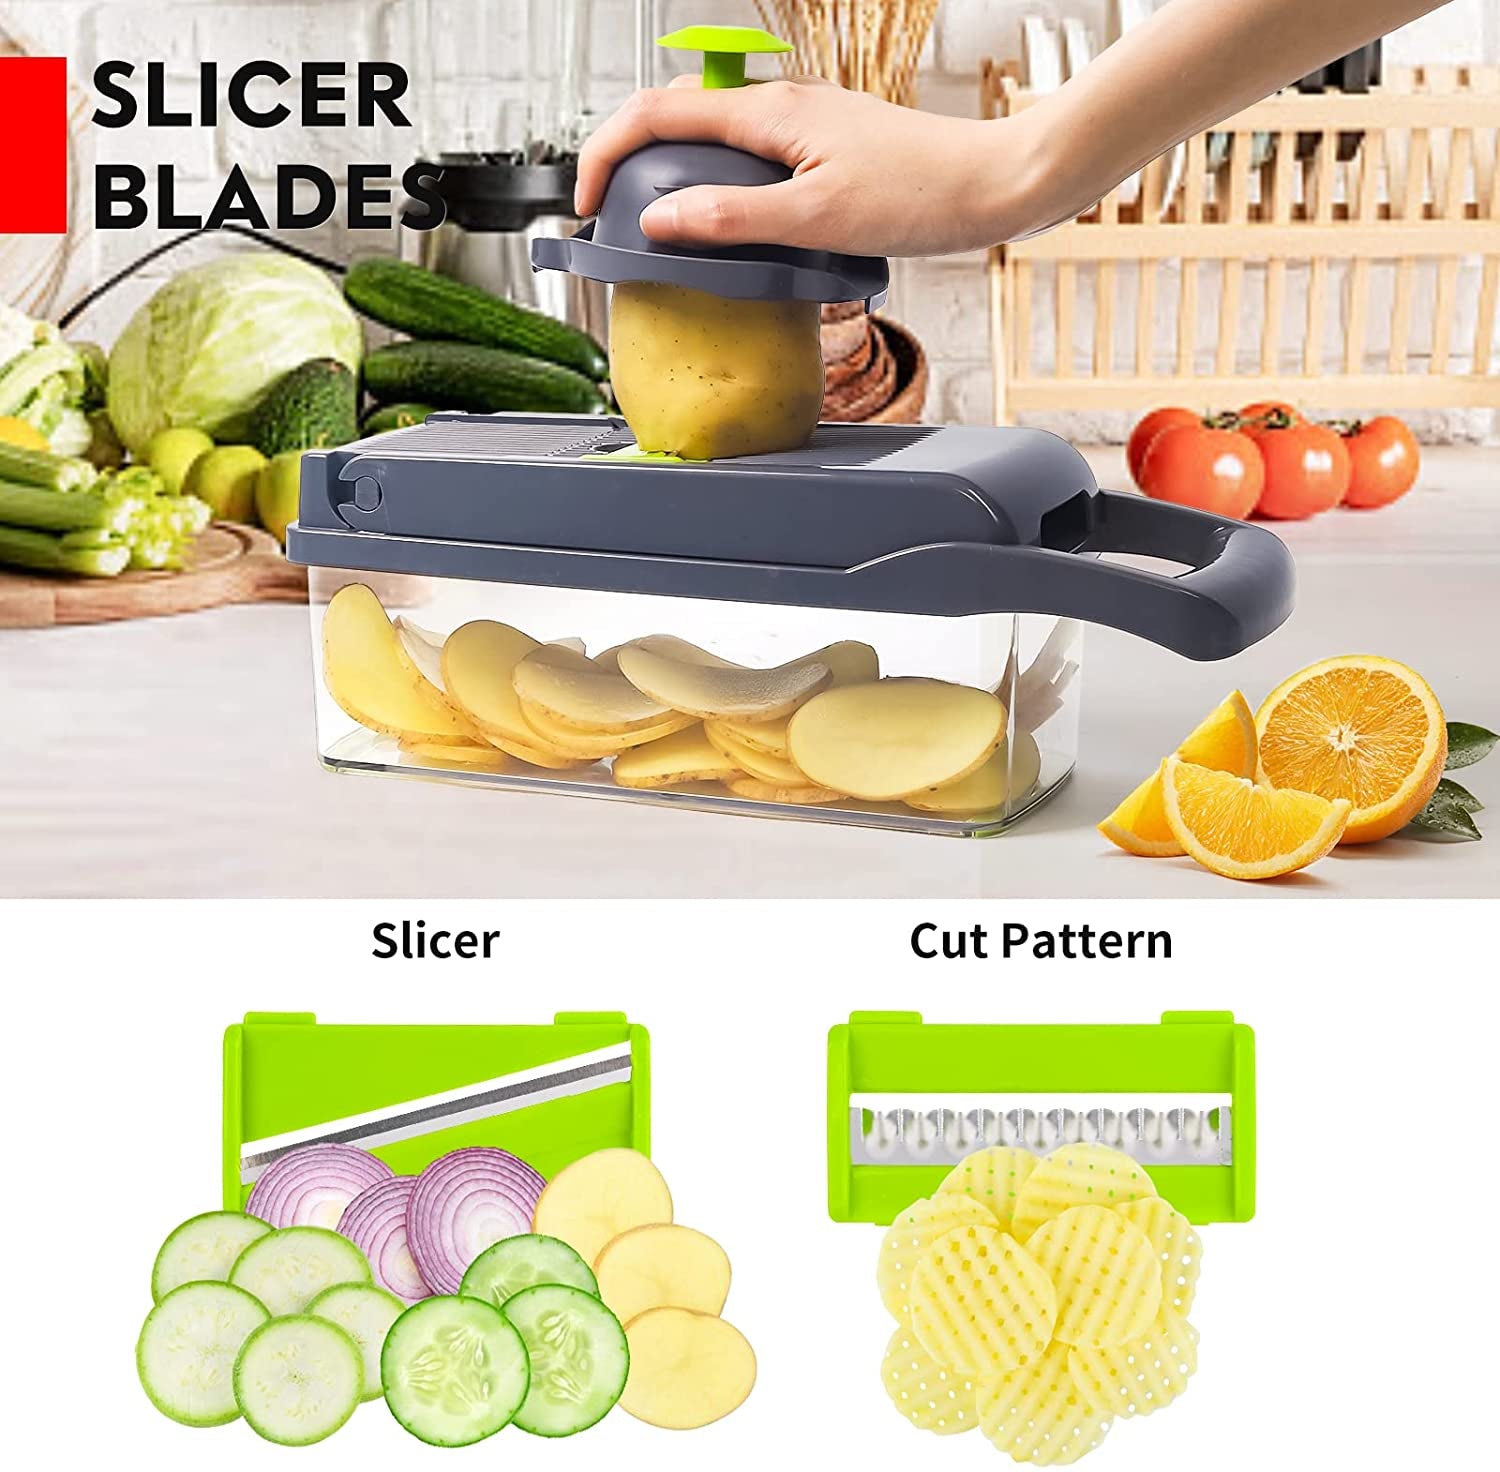 Vegetable Chopper, Pro Onion Chopper, Multifunctional 13 in 1 Food Chopper, Kitchen Vegetable Slicer Dicer Cutter,Veggie Chopper with 8 Blades,Carrot and Garlic Chopper with Container (Gray)